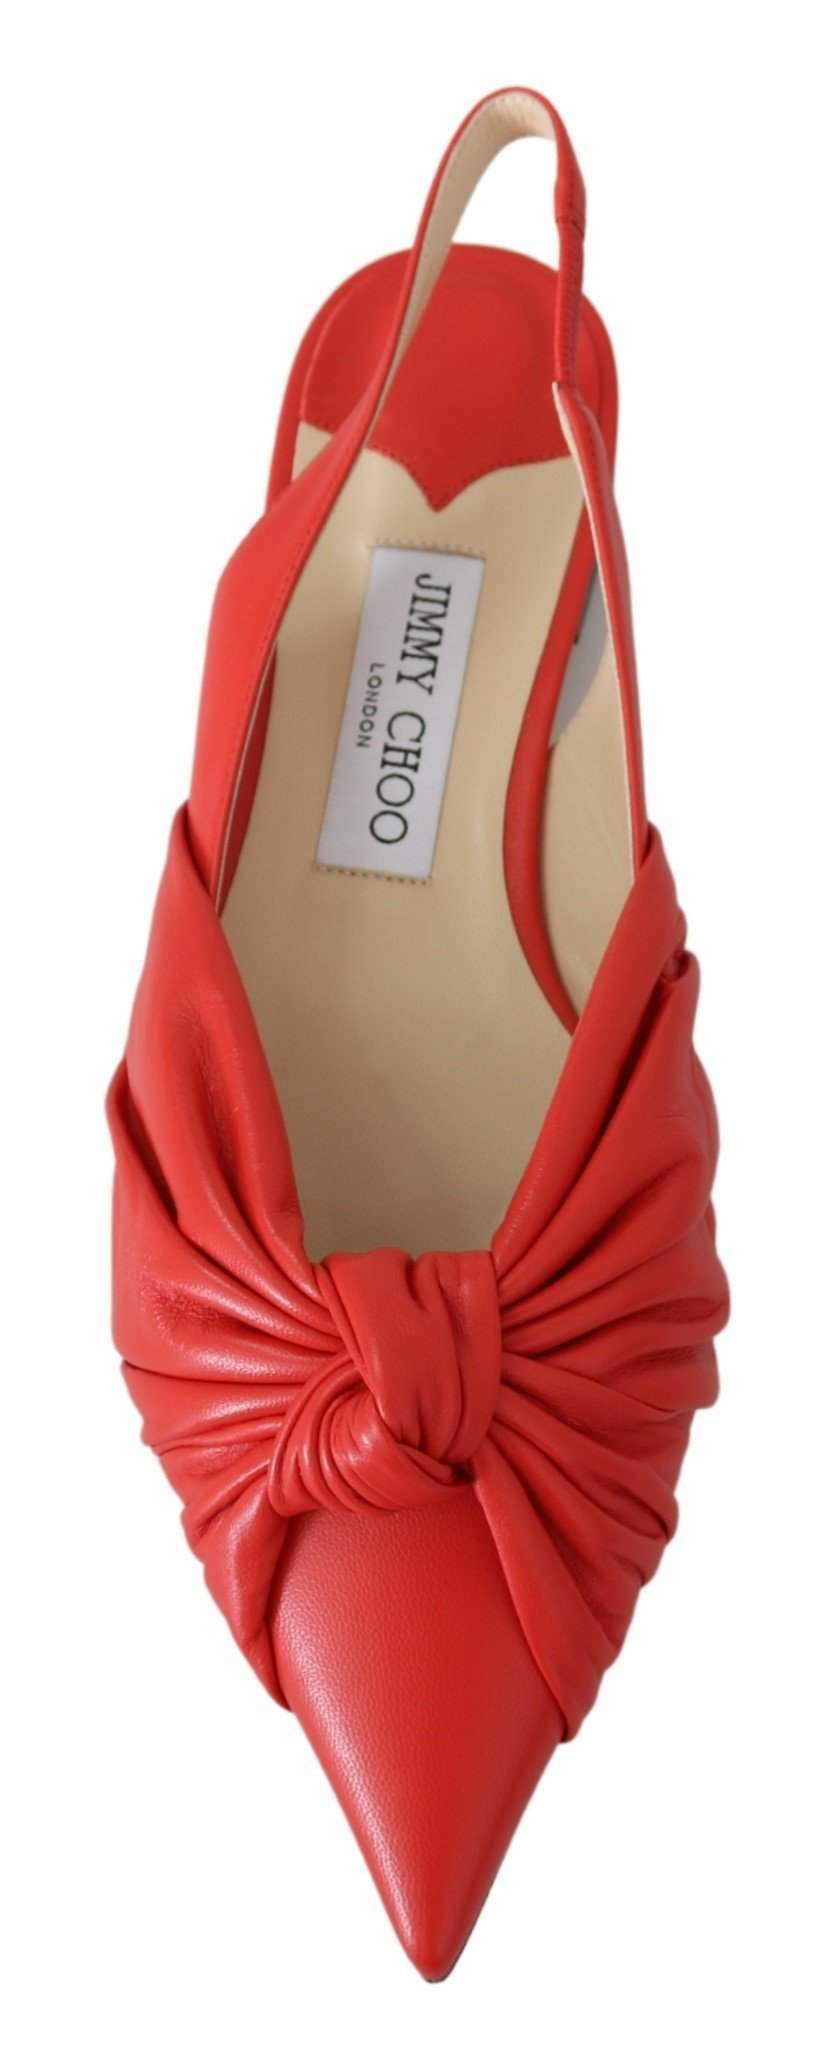 Annabell Flat Nap Chilli Leather Flat Shoes #women, EU36.5/US6.5, EU36/US6, EU38.5/US8.5, EU38/US8, EU39/US9, feed-agegroup-adult, feed-color-red, feed-gender-female, feed-size-US6, feed-size-US6.5, feed-size-US8, feed-size-US8.5, feed-size-US9, Flat Shoes - Women - Shoes, Gender_Women, Jimmy Choo, Red, Shoes - New Arrivals at SEYMAYKA